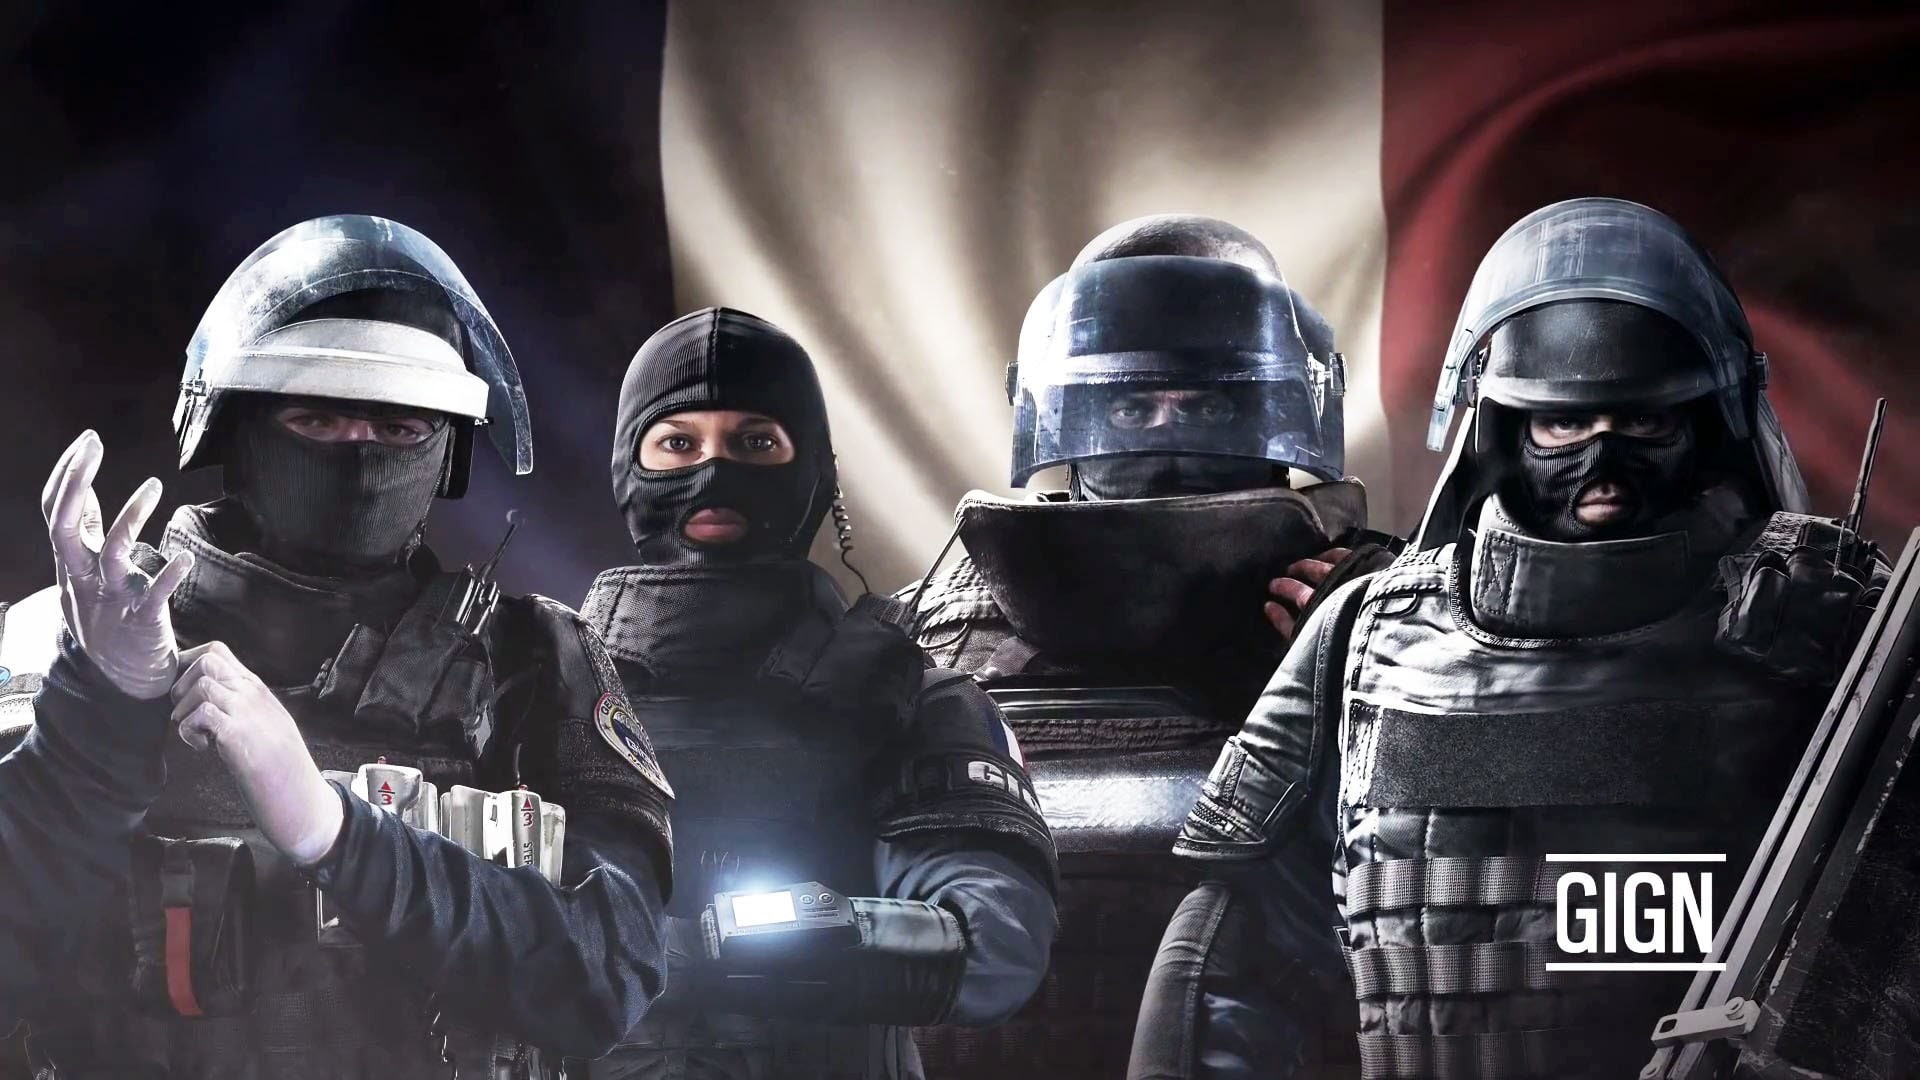 rainbow six siege tom clancys ubisoft video games gign special forces